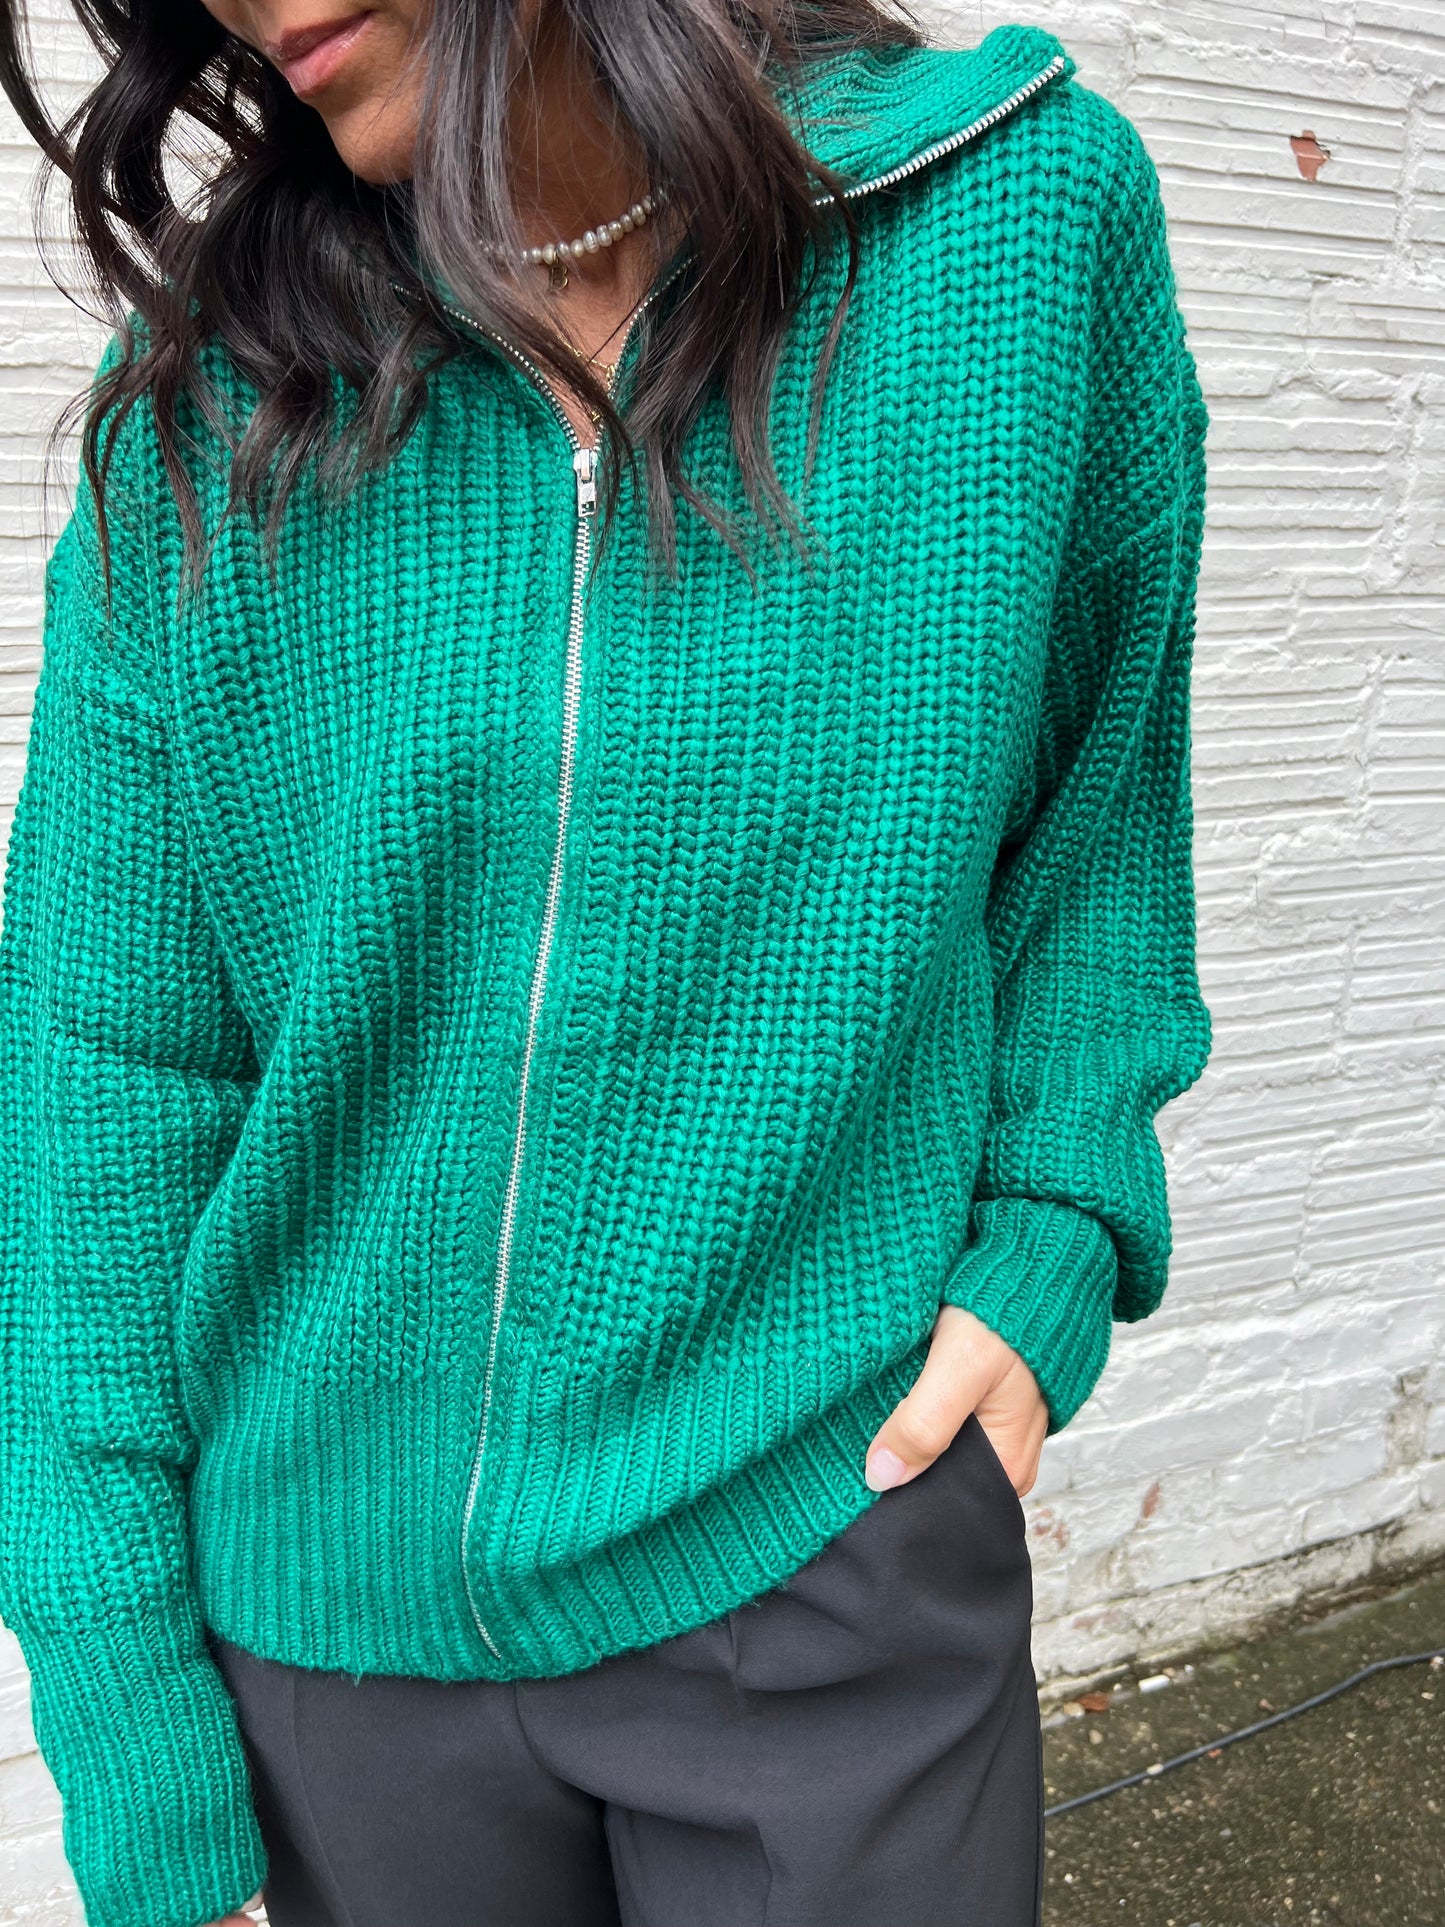 H-TOWN KELLY GREEN CHUNKY ZIP UP SWEATER JACKET - THE HIP EAGLE BOUTIQUE 